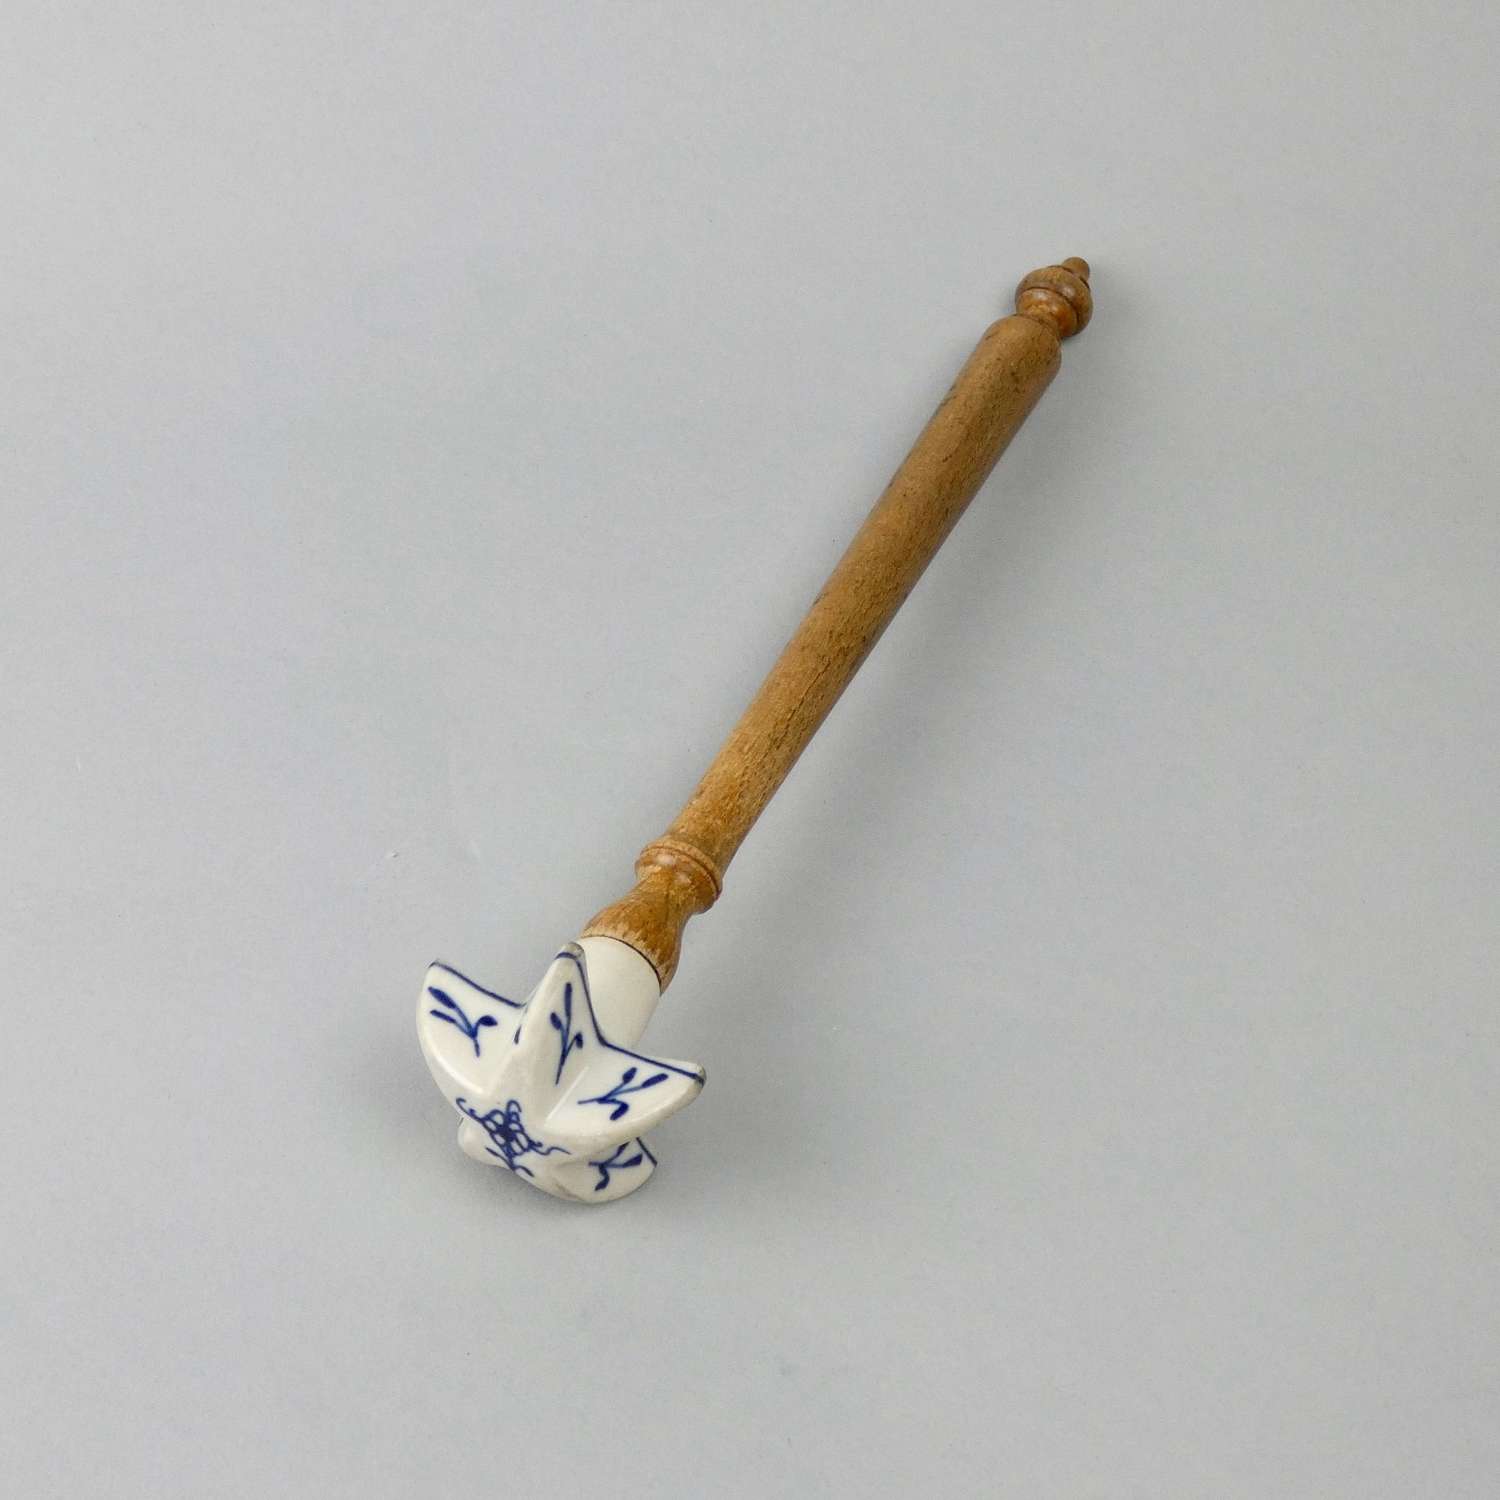 Porcelain chocolate whisk